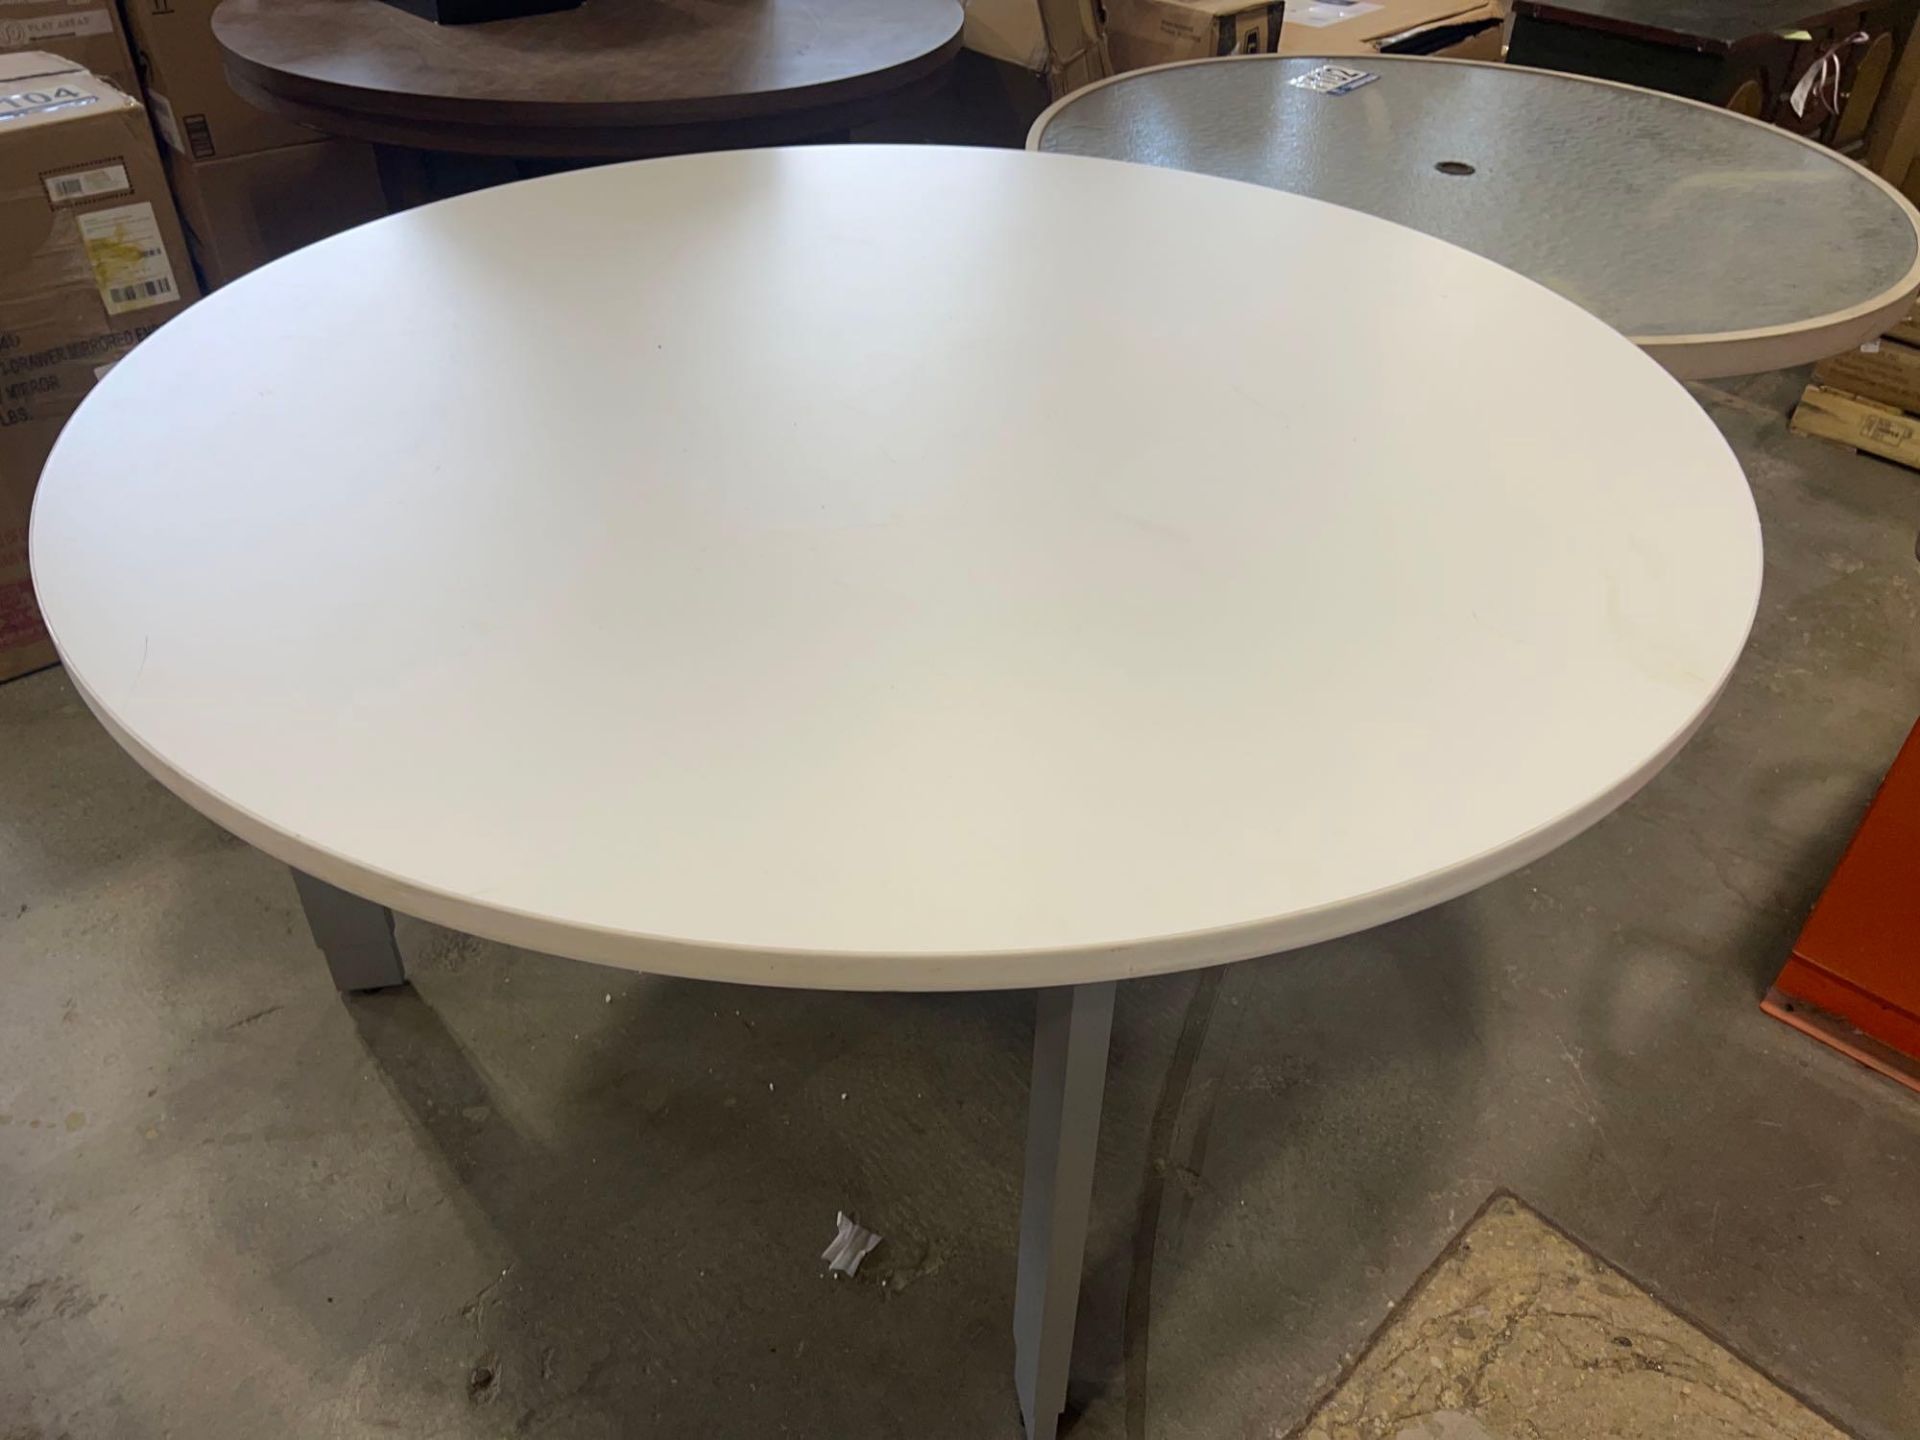 2 Round Tables and Glass End Table - Image 4 of 4